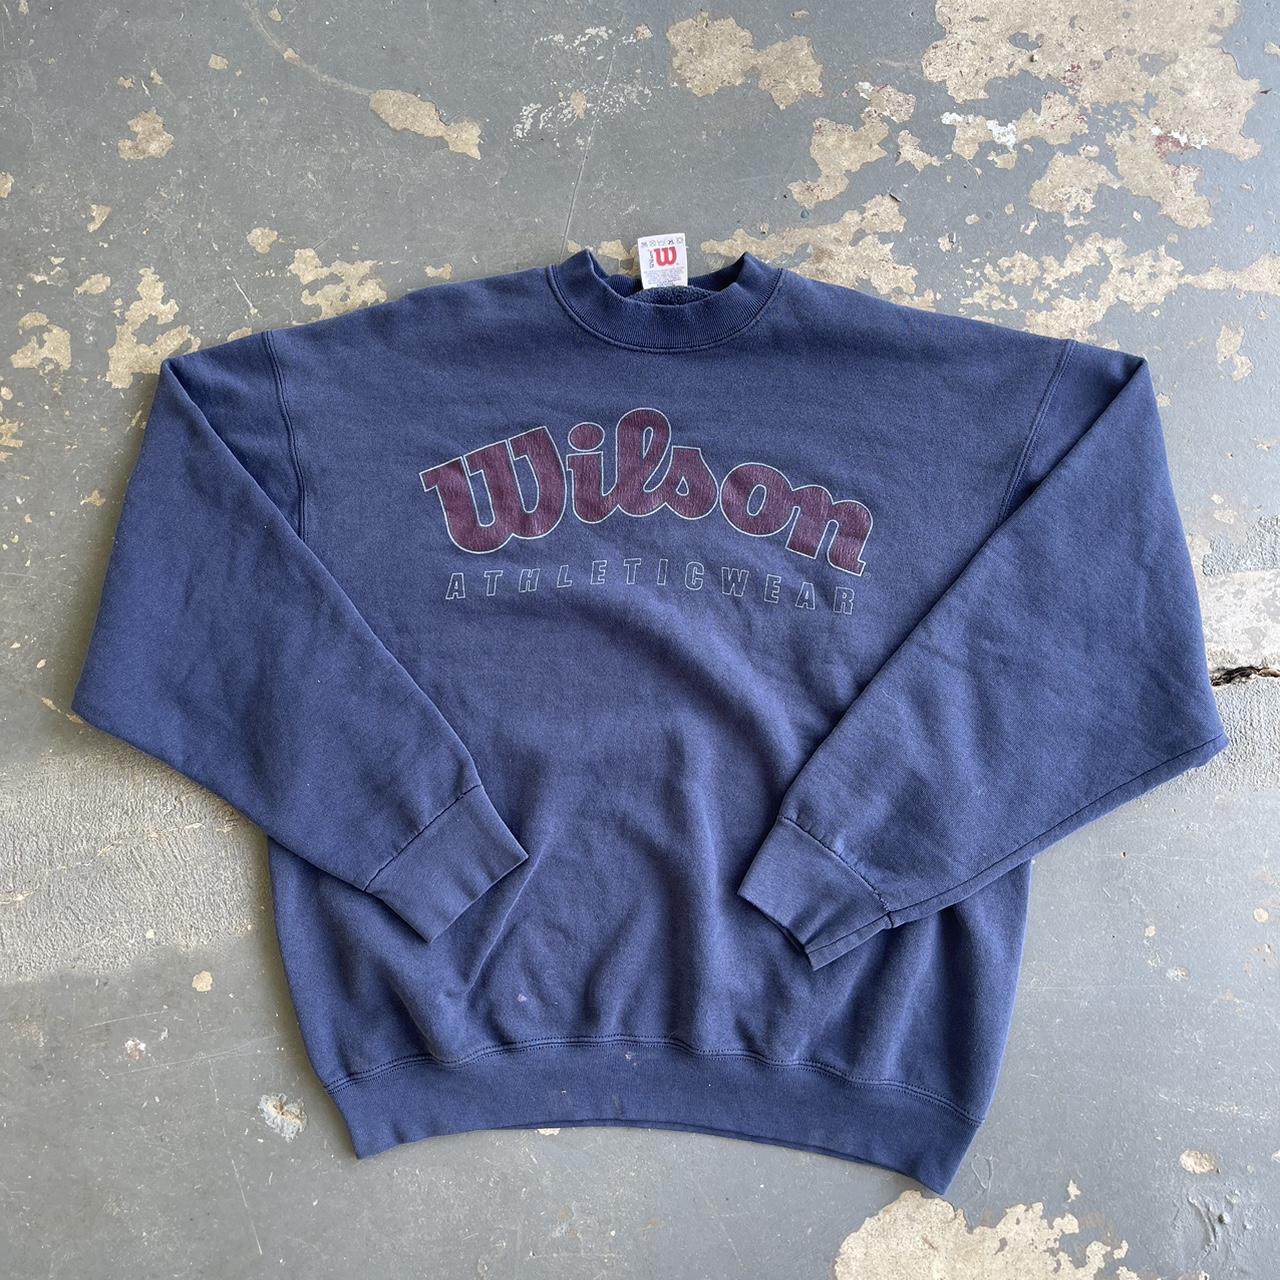 Faded Wilson Spellout Crewneck -Faded... - Depop